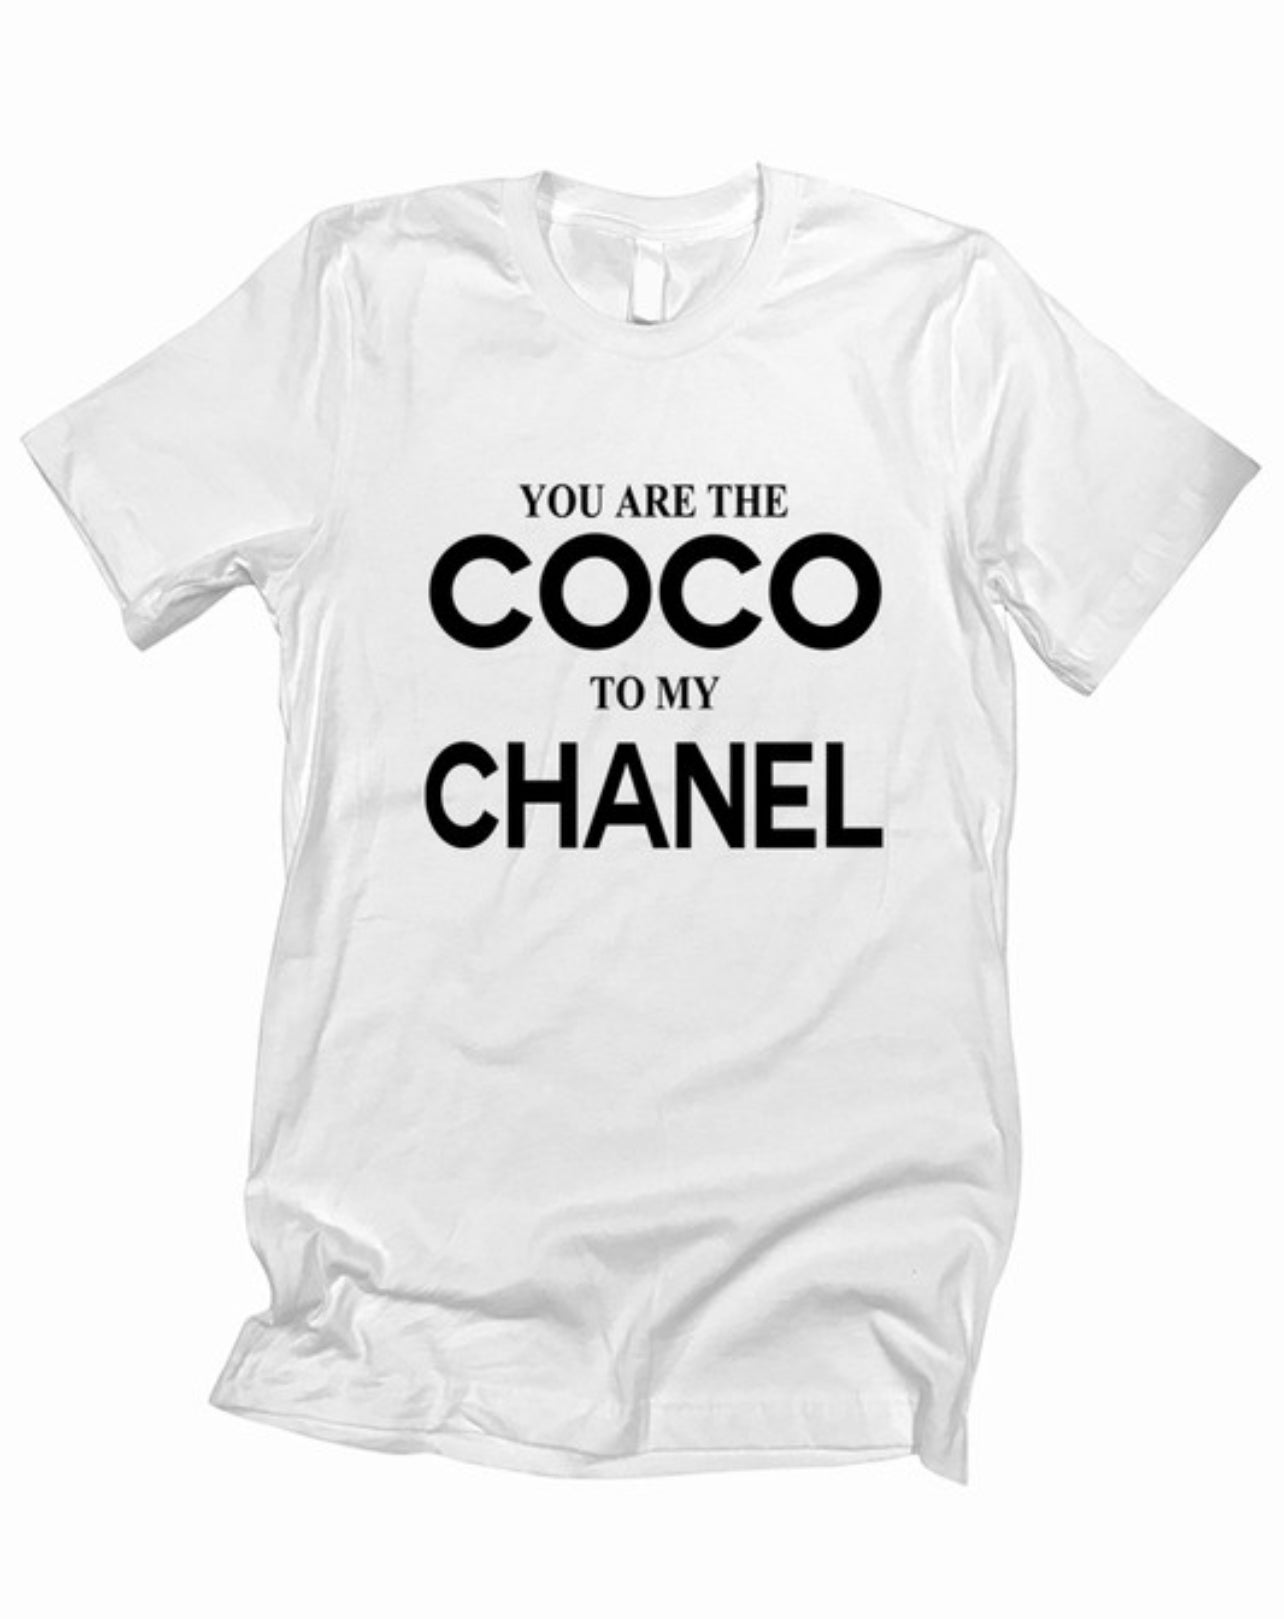 "YOU ARE THE COCO TO MY CHANEL "Women's Top